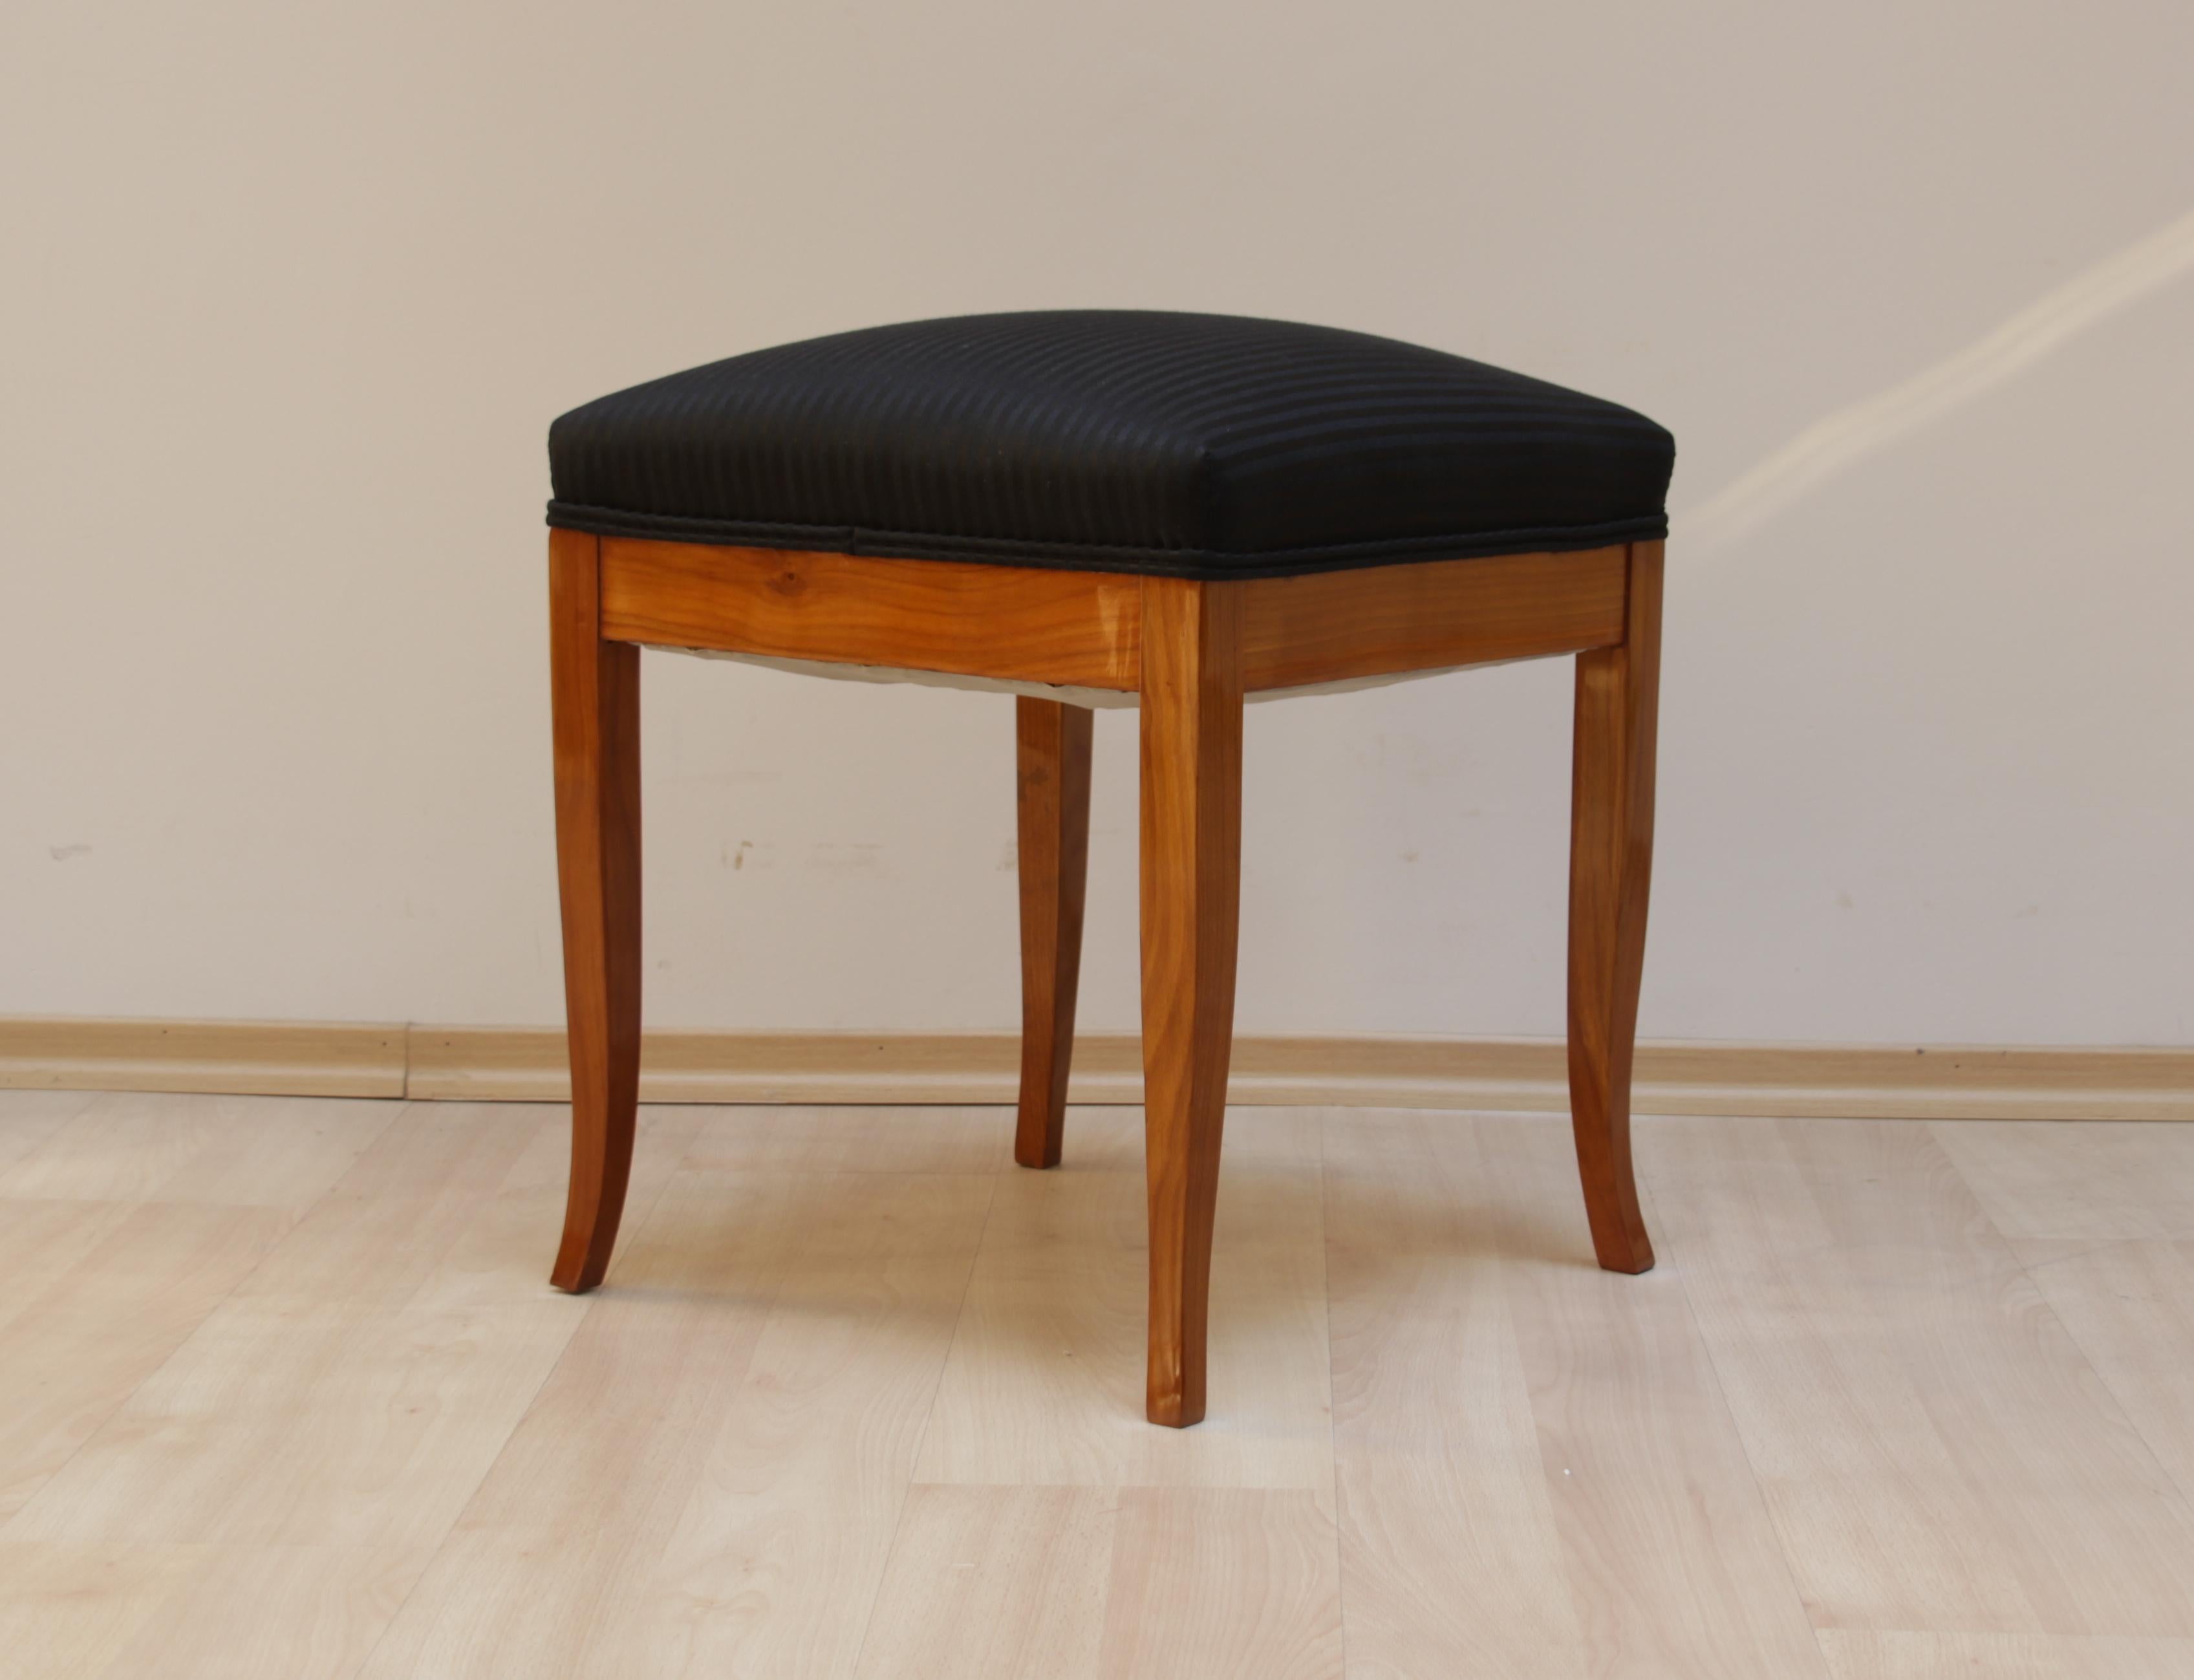 Wonderful, classic and very spartan Stool / Pouff from South Germany, 2nd Biedermeier period, late 19. century.
Cherry veneer and solid wood, hand-polished with shellac.
New upholstery with black-on-black striped fabric and surrounding double keder.